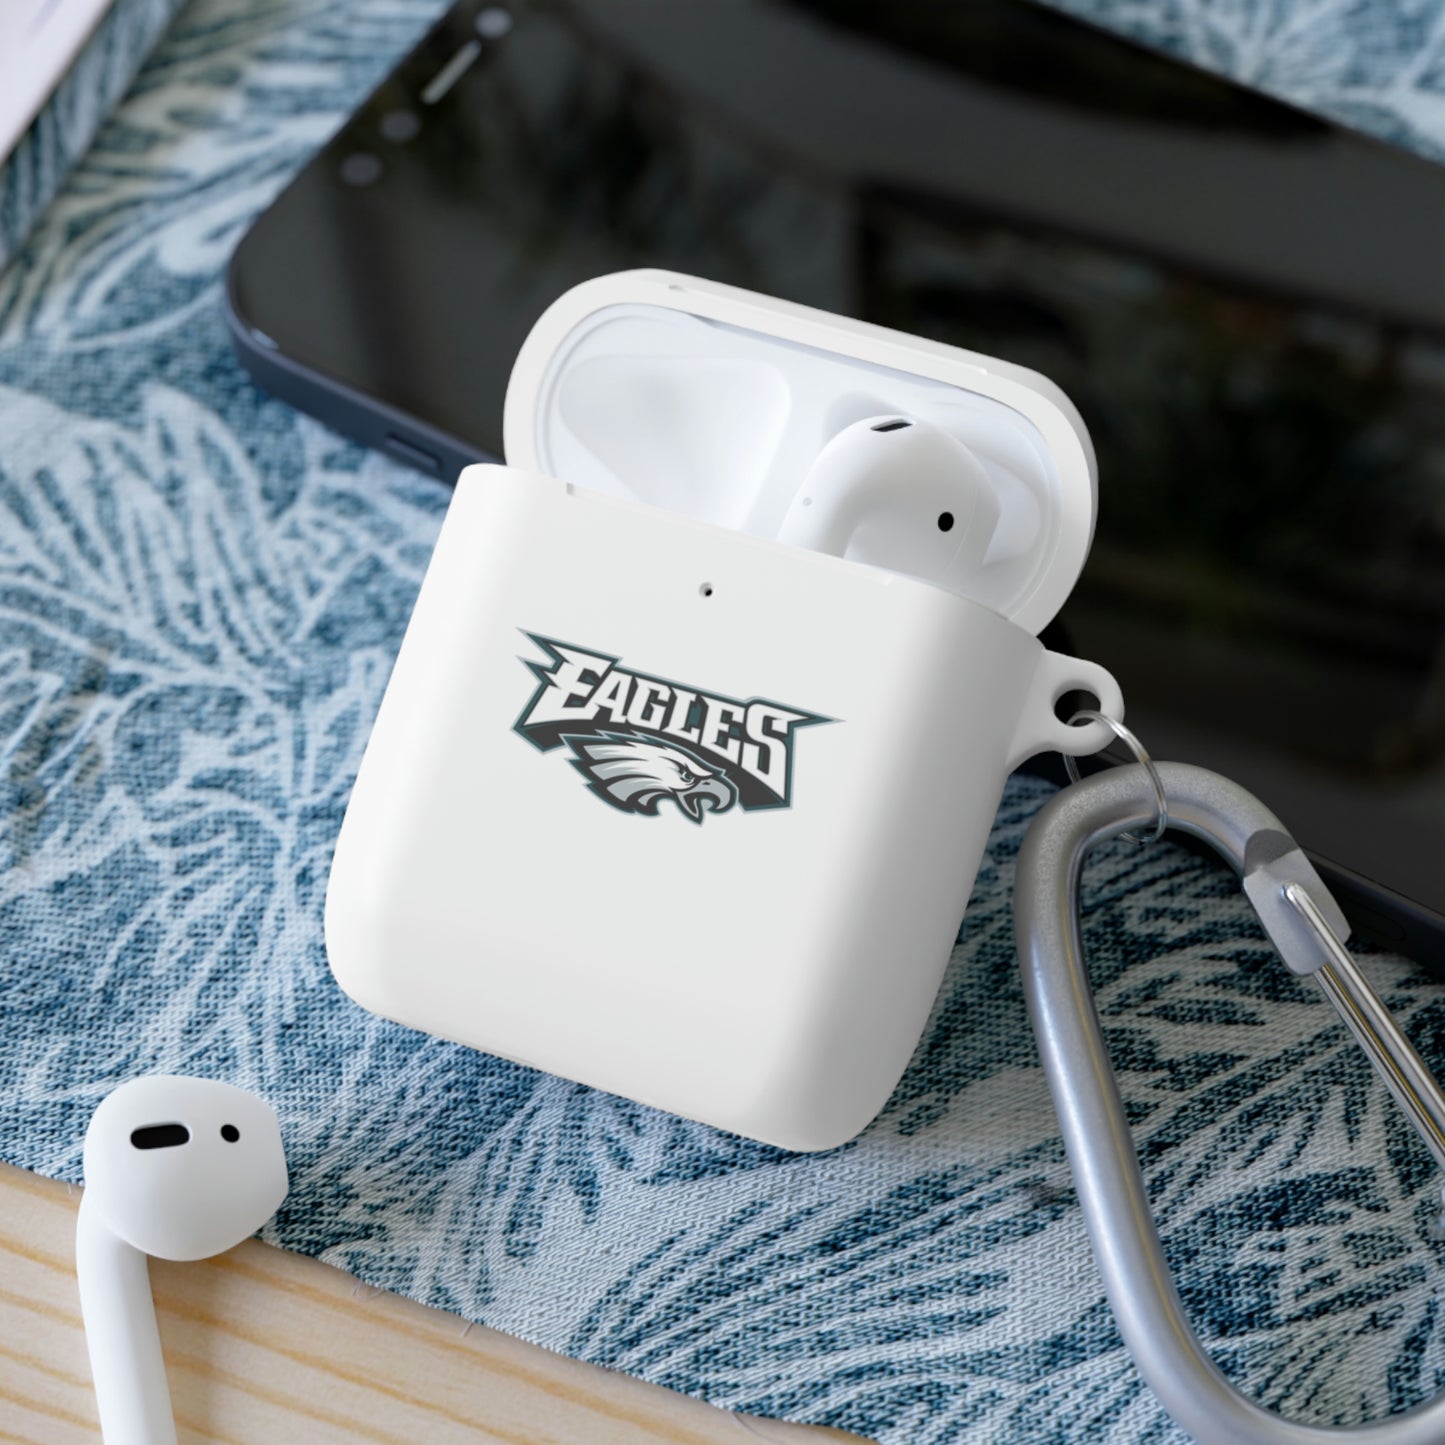 Philadelphia Eagles AirPods and AirPods Pro Case Cover